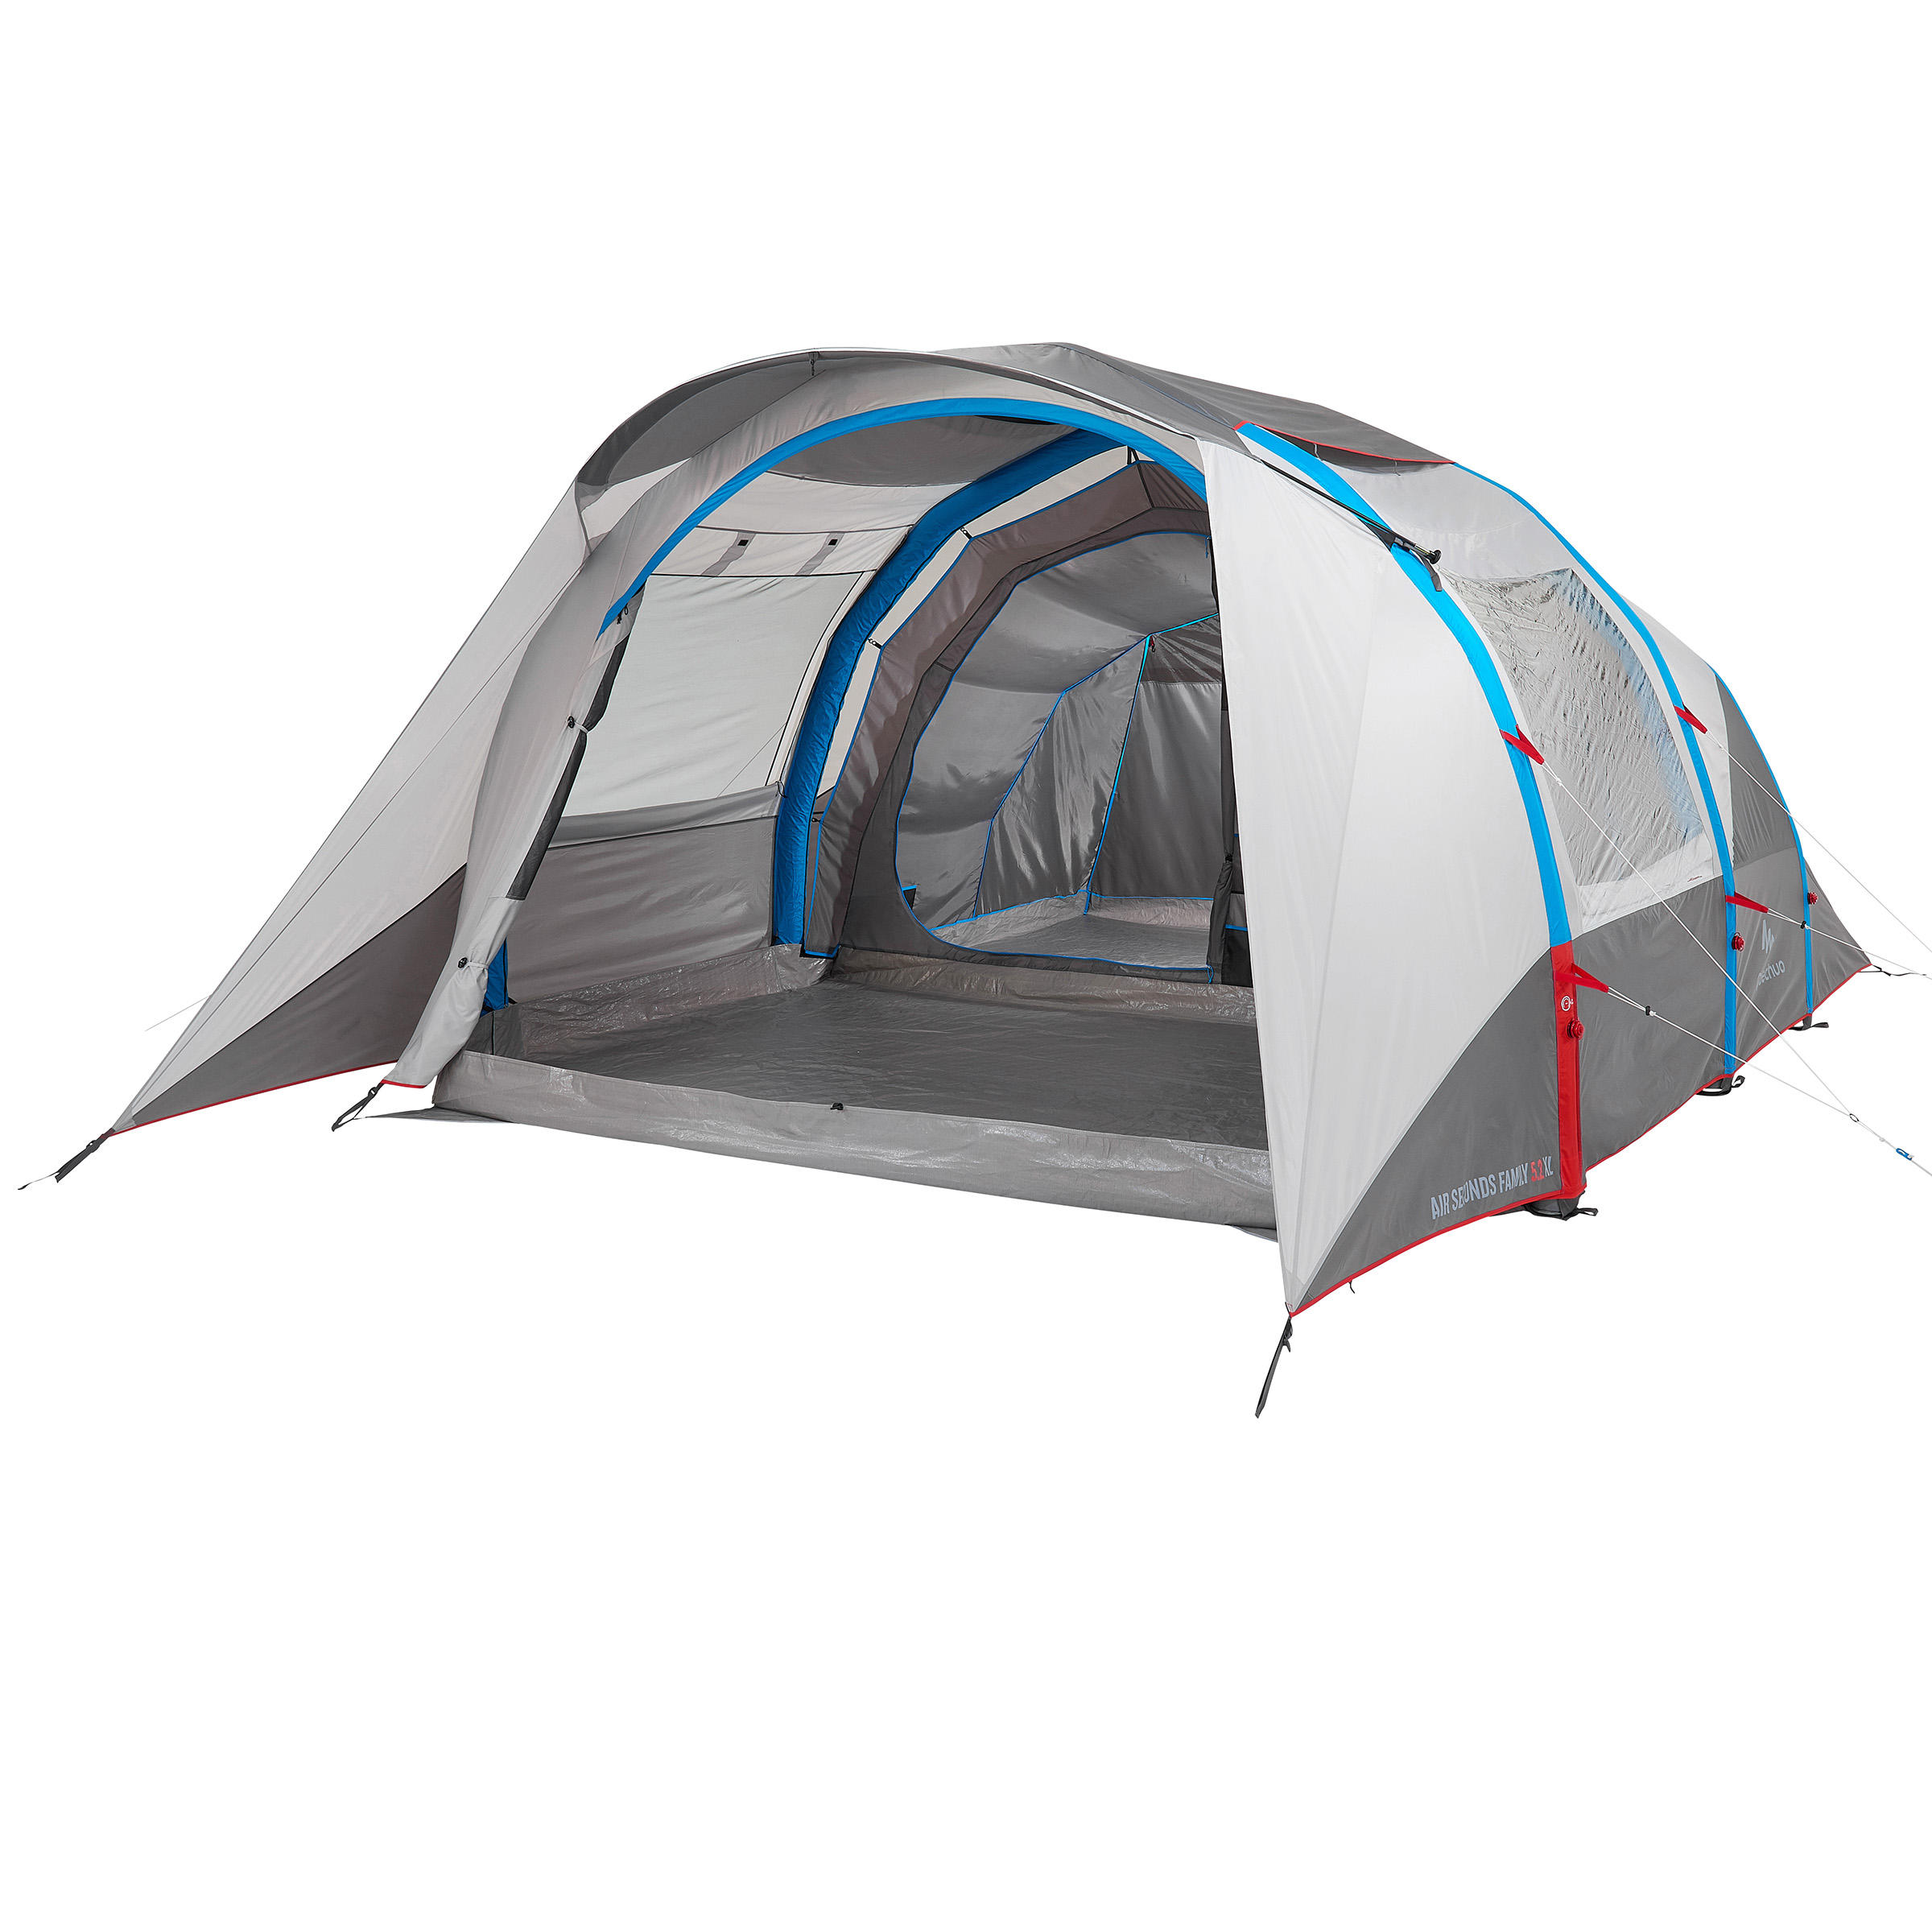 Remarkable clearly dome Piese de schimb corturi | Decathlon